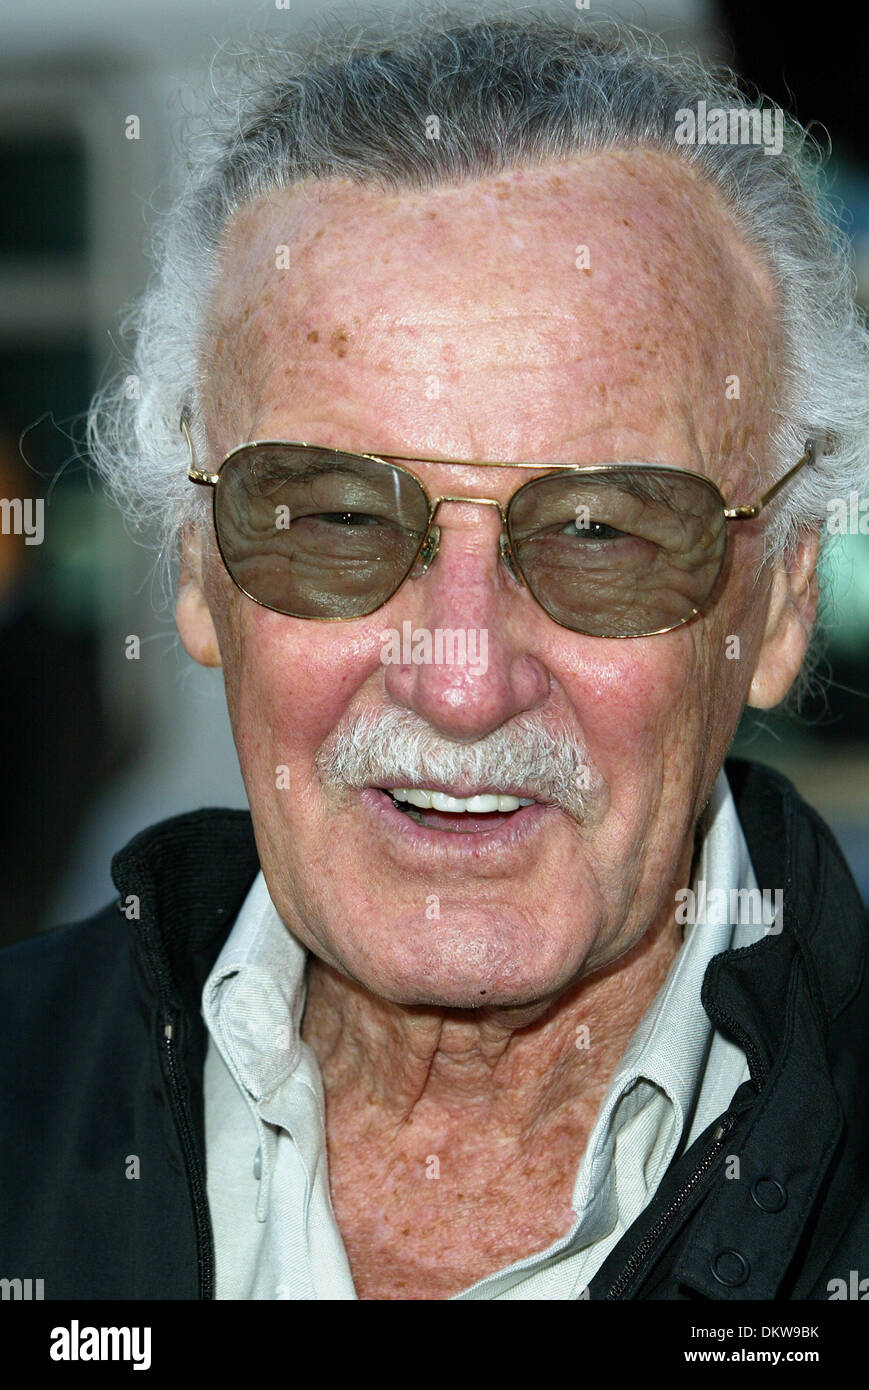 STAN LEE.MARVEL COMIC CREATOR.S Angeles, USA.Chinese Theatre, à Hollywood, LO.11/06/2002.LAB5049. Banque D'Images